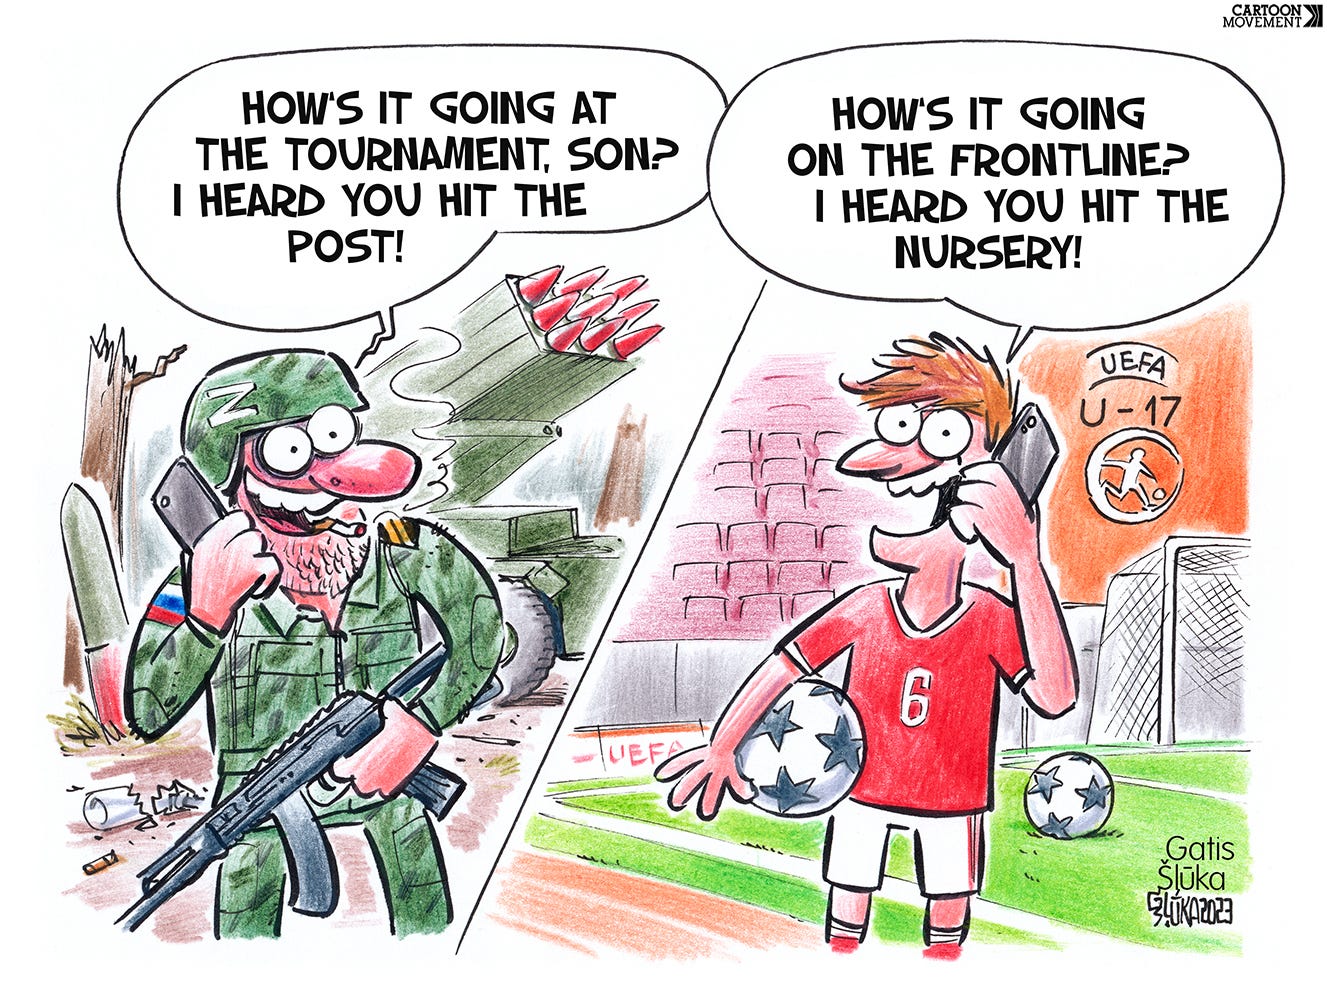 Split screen cartoon showing a Russian soldier on the left calling his son. His son is on the right at the U17 championship, dressed in the Russian national football uniform with a ball under his arm. The soldier says: "How's it going at the tournament, son? I heard you hit the post!" The son replies: "How's it going at the frontline? I heard you hit the nursery!